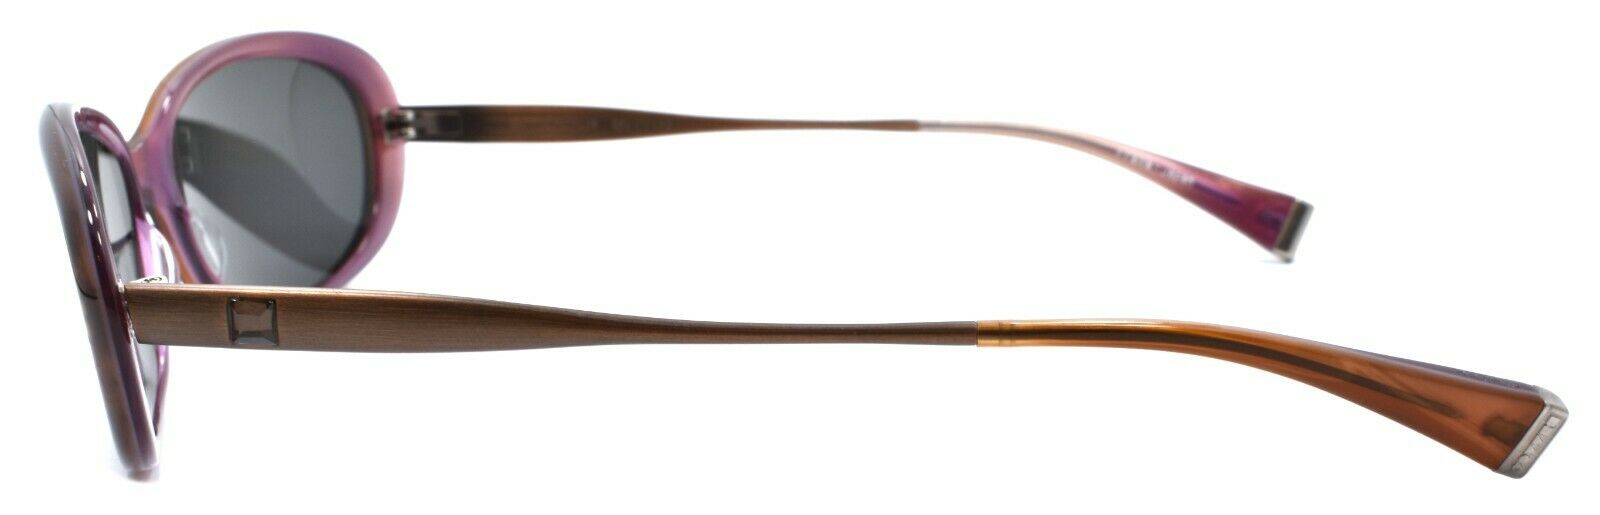 3-Oliver Peoples Marion Women's Sunglasses Brown on Violet / Gray JAPAN-Does not apply-IKSpecs